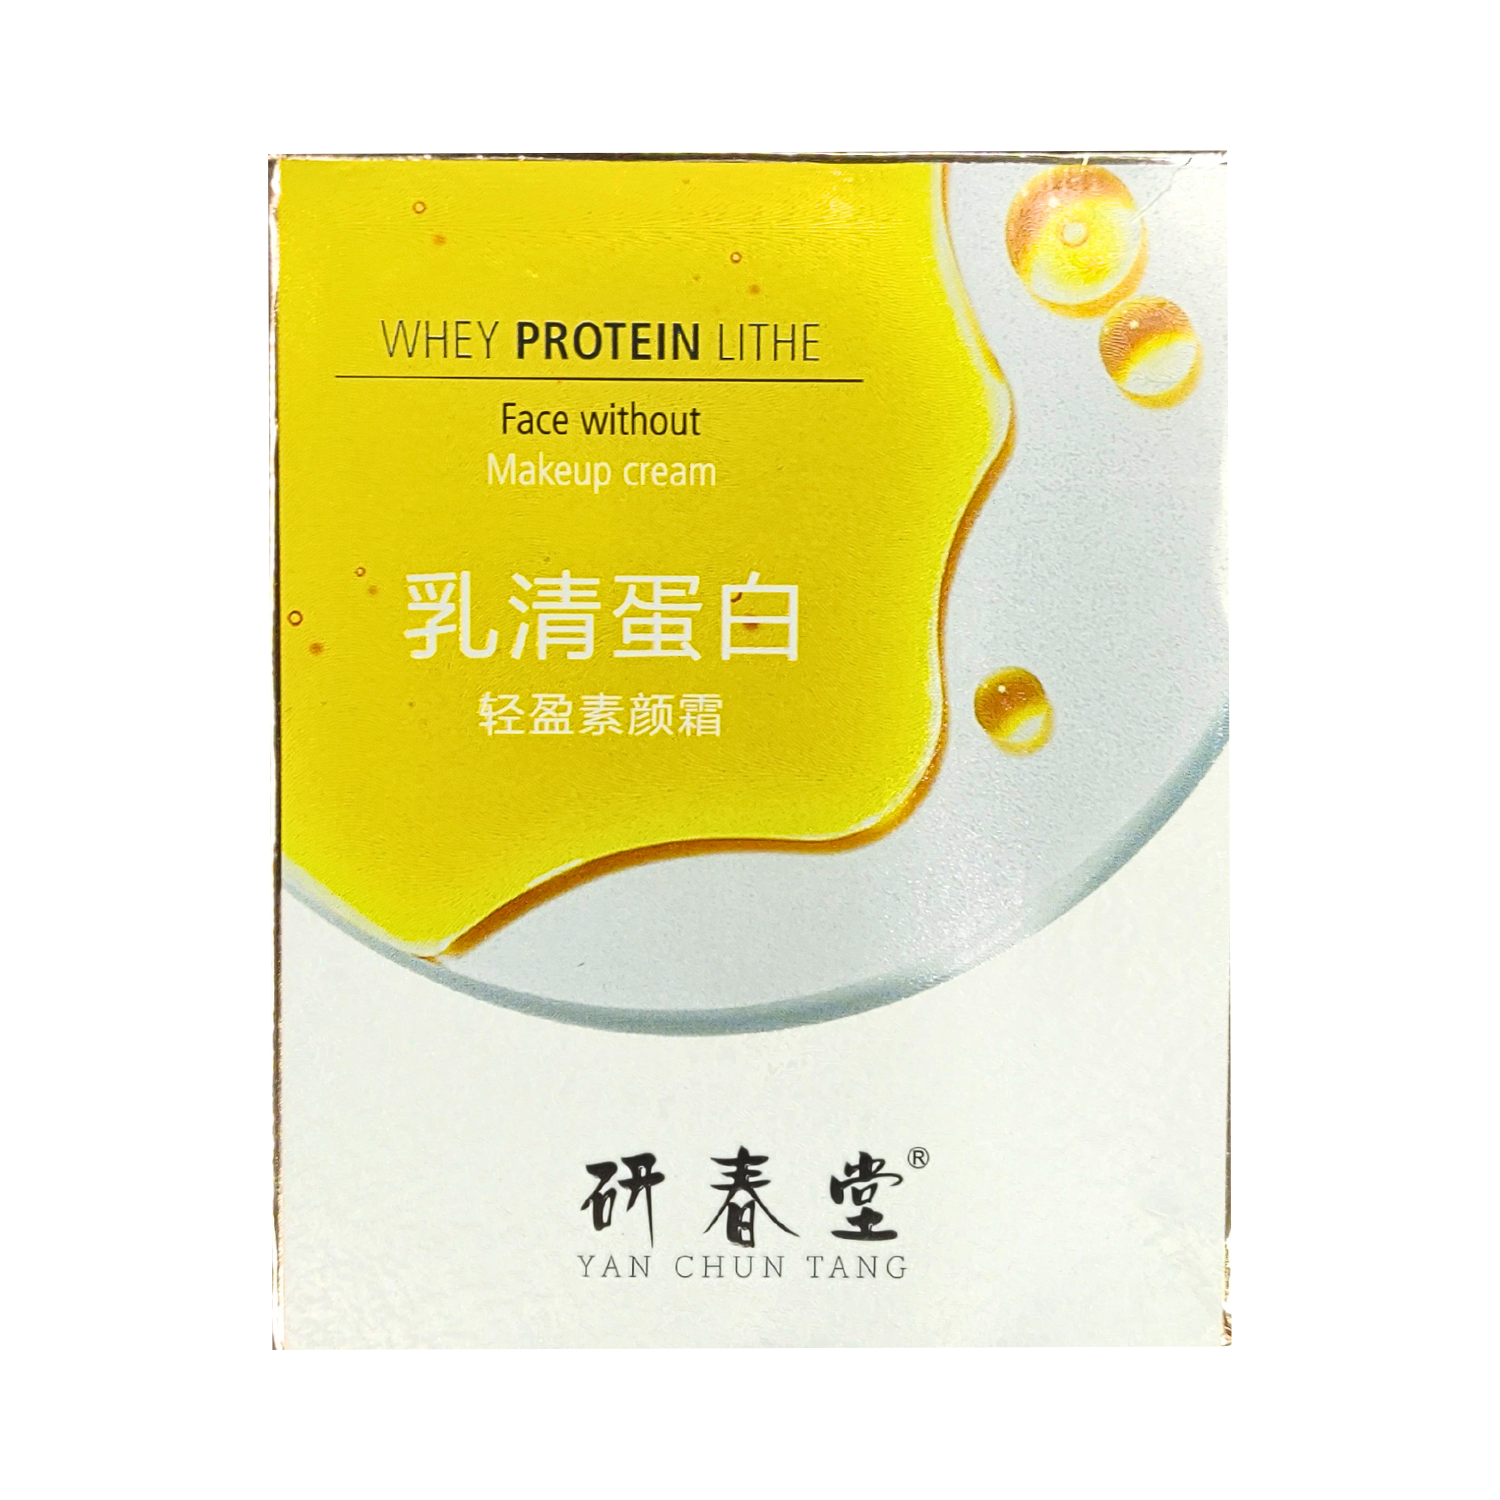 yan-chun-tang-whey-protein-lithe-face-without-makeup-ceam-50g